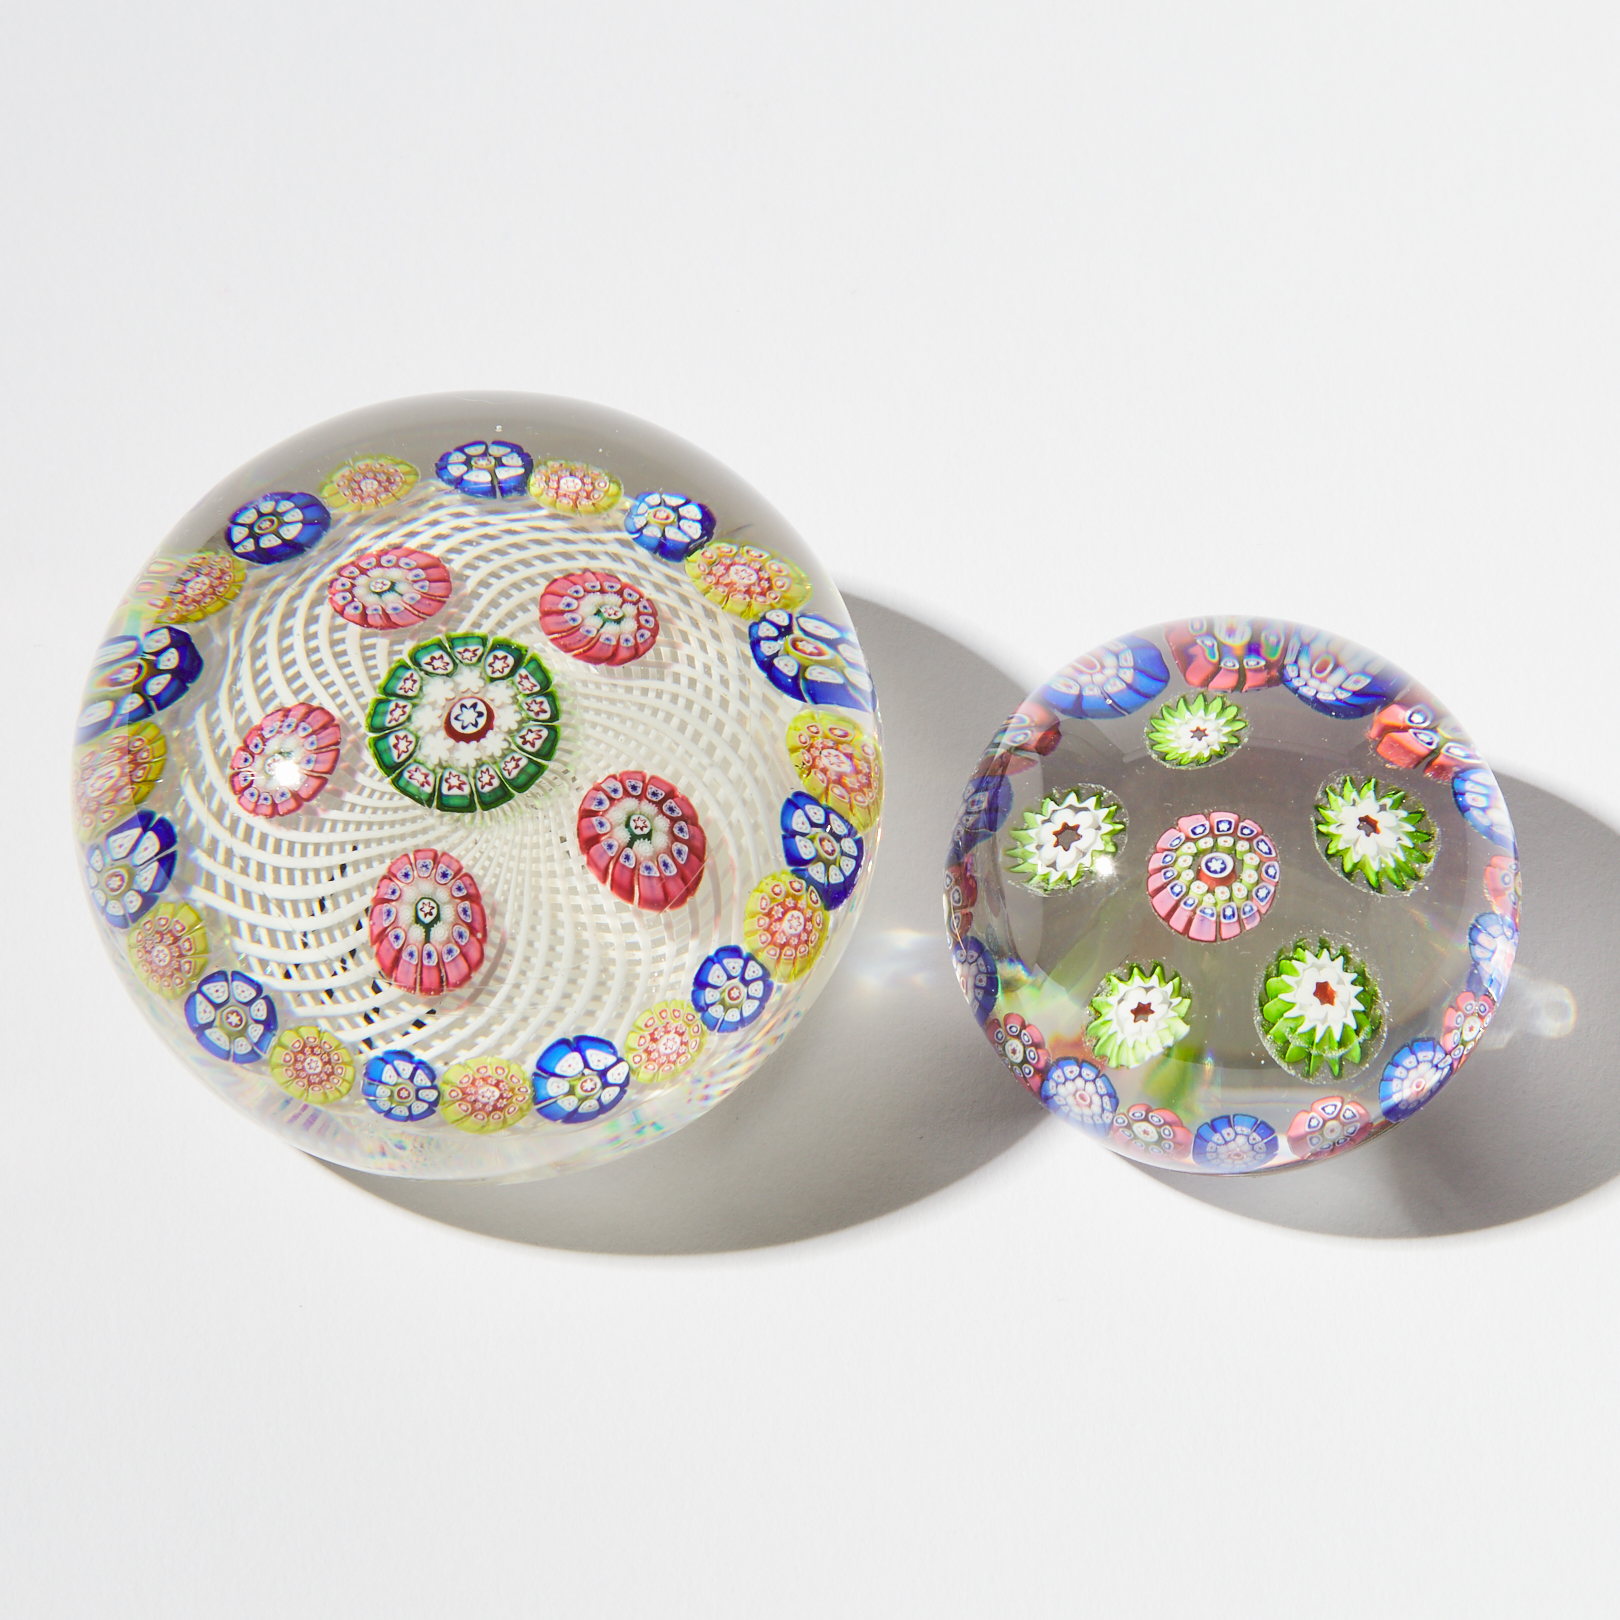 Two Saint Louis Millefiori Glass Paperweights, mid-19th century